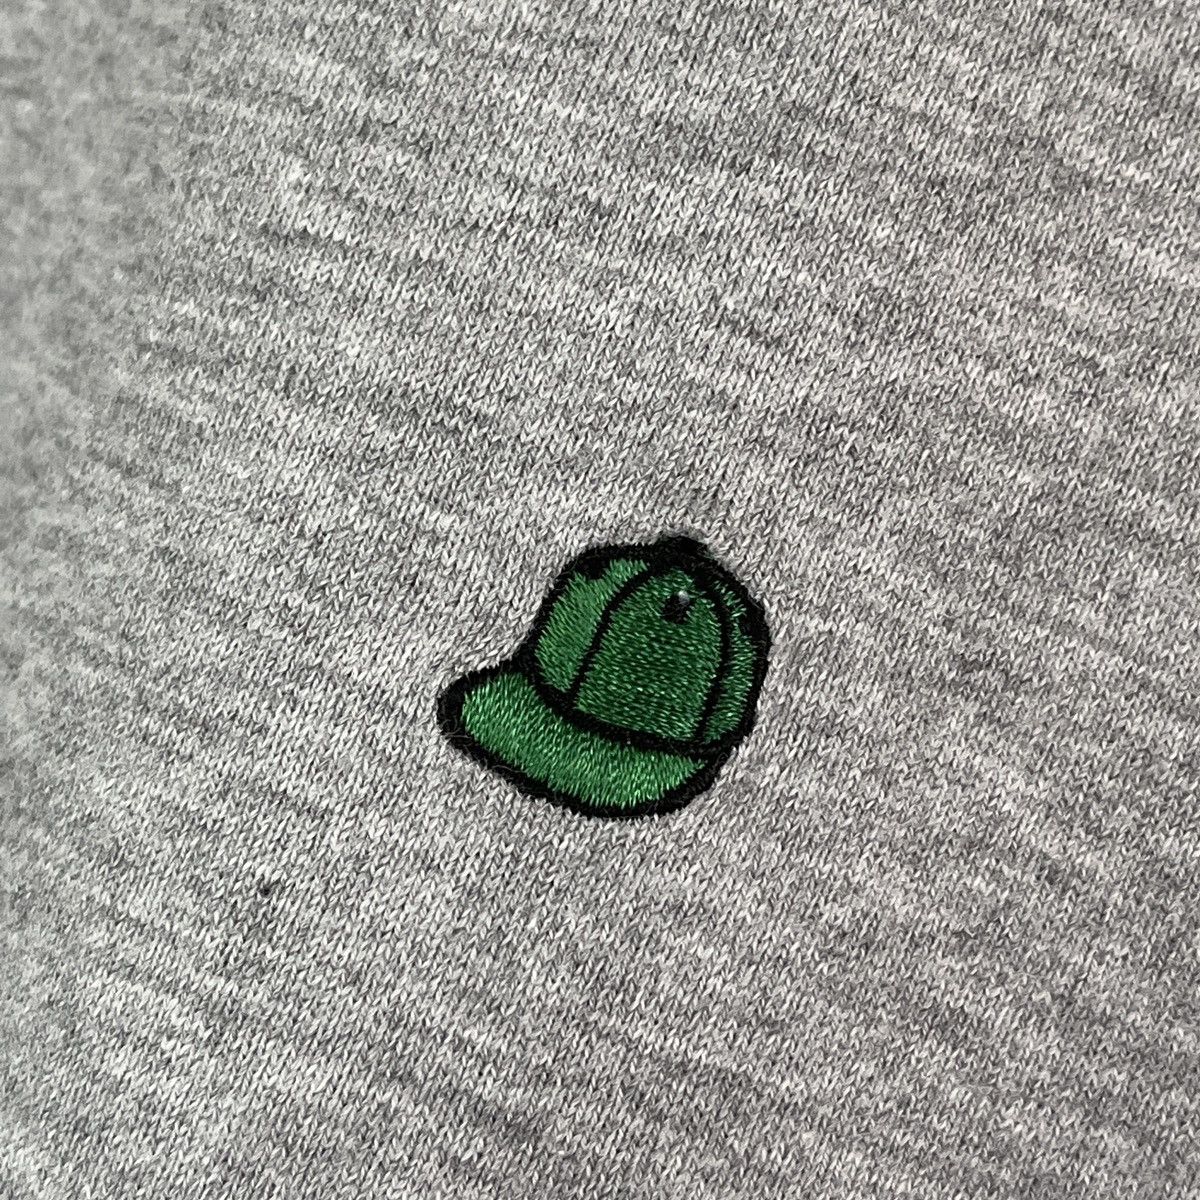 Rare Vintage New Era Cap TShirt With Small Embroidery Logo - 13